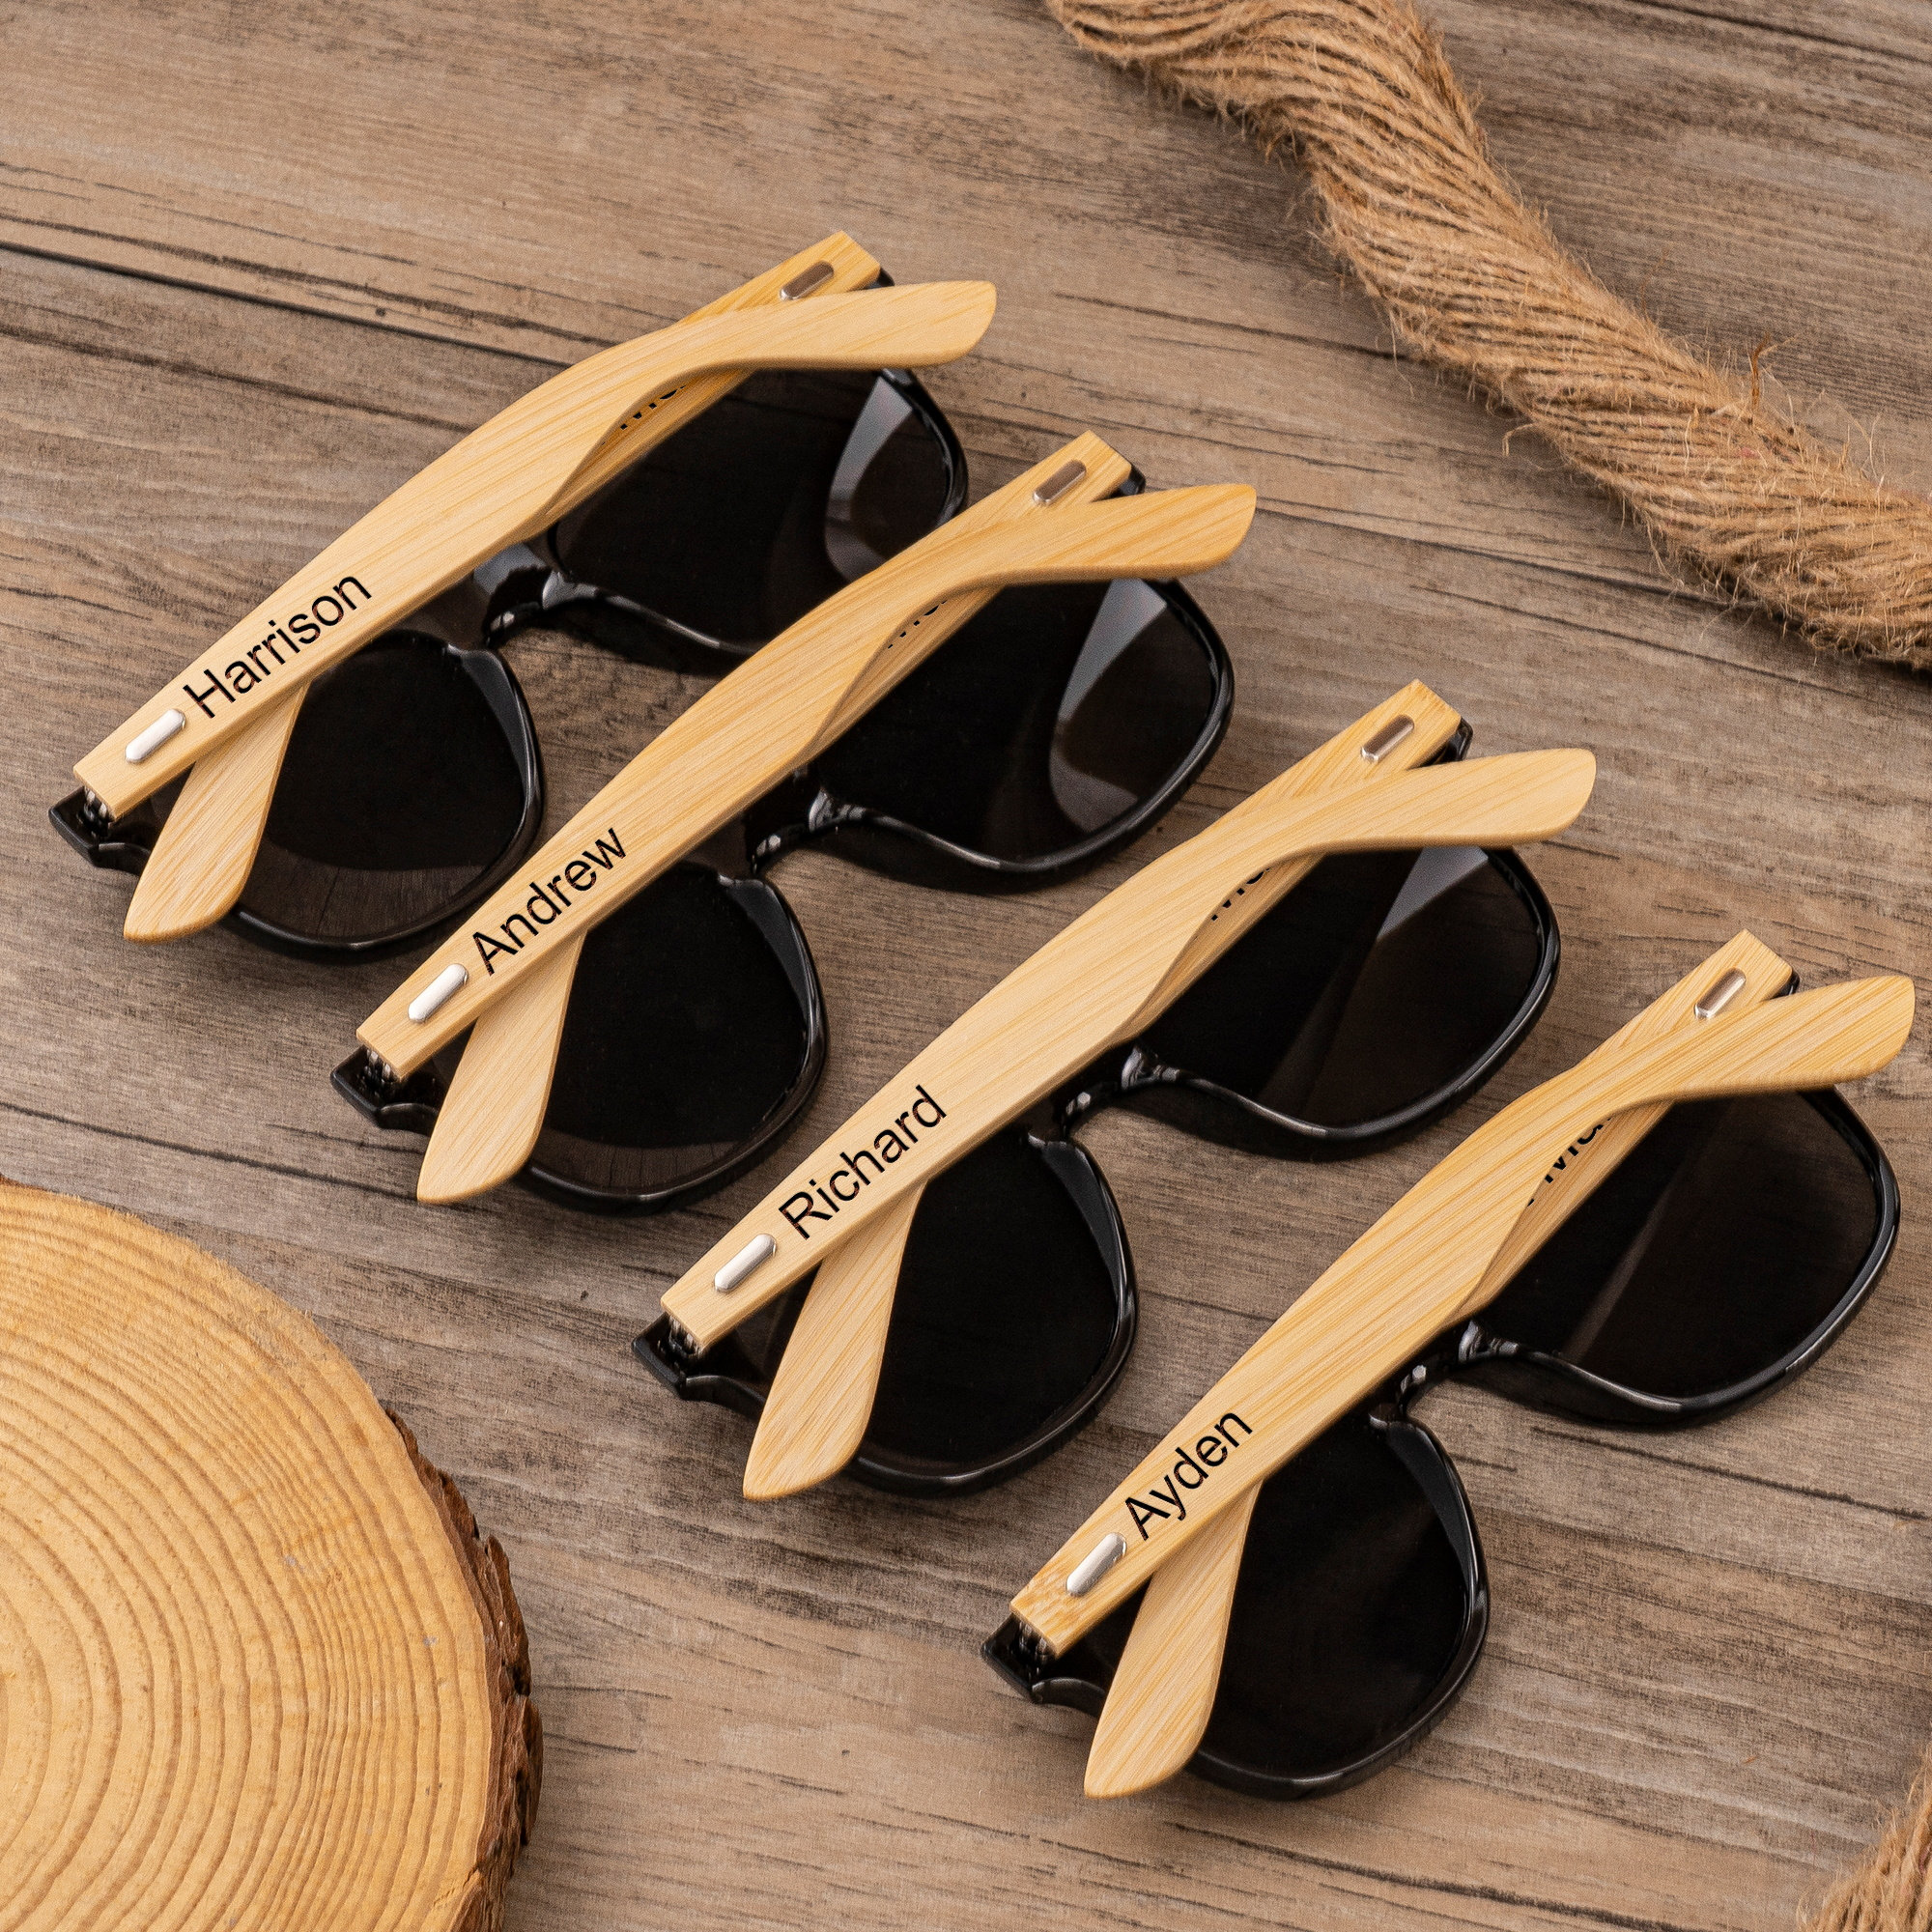 31 Styling Sunglasses For Your Groomsmen - Groovy Groomsmen Gifts